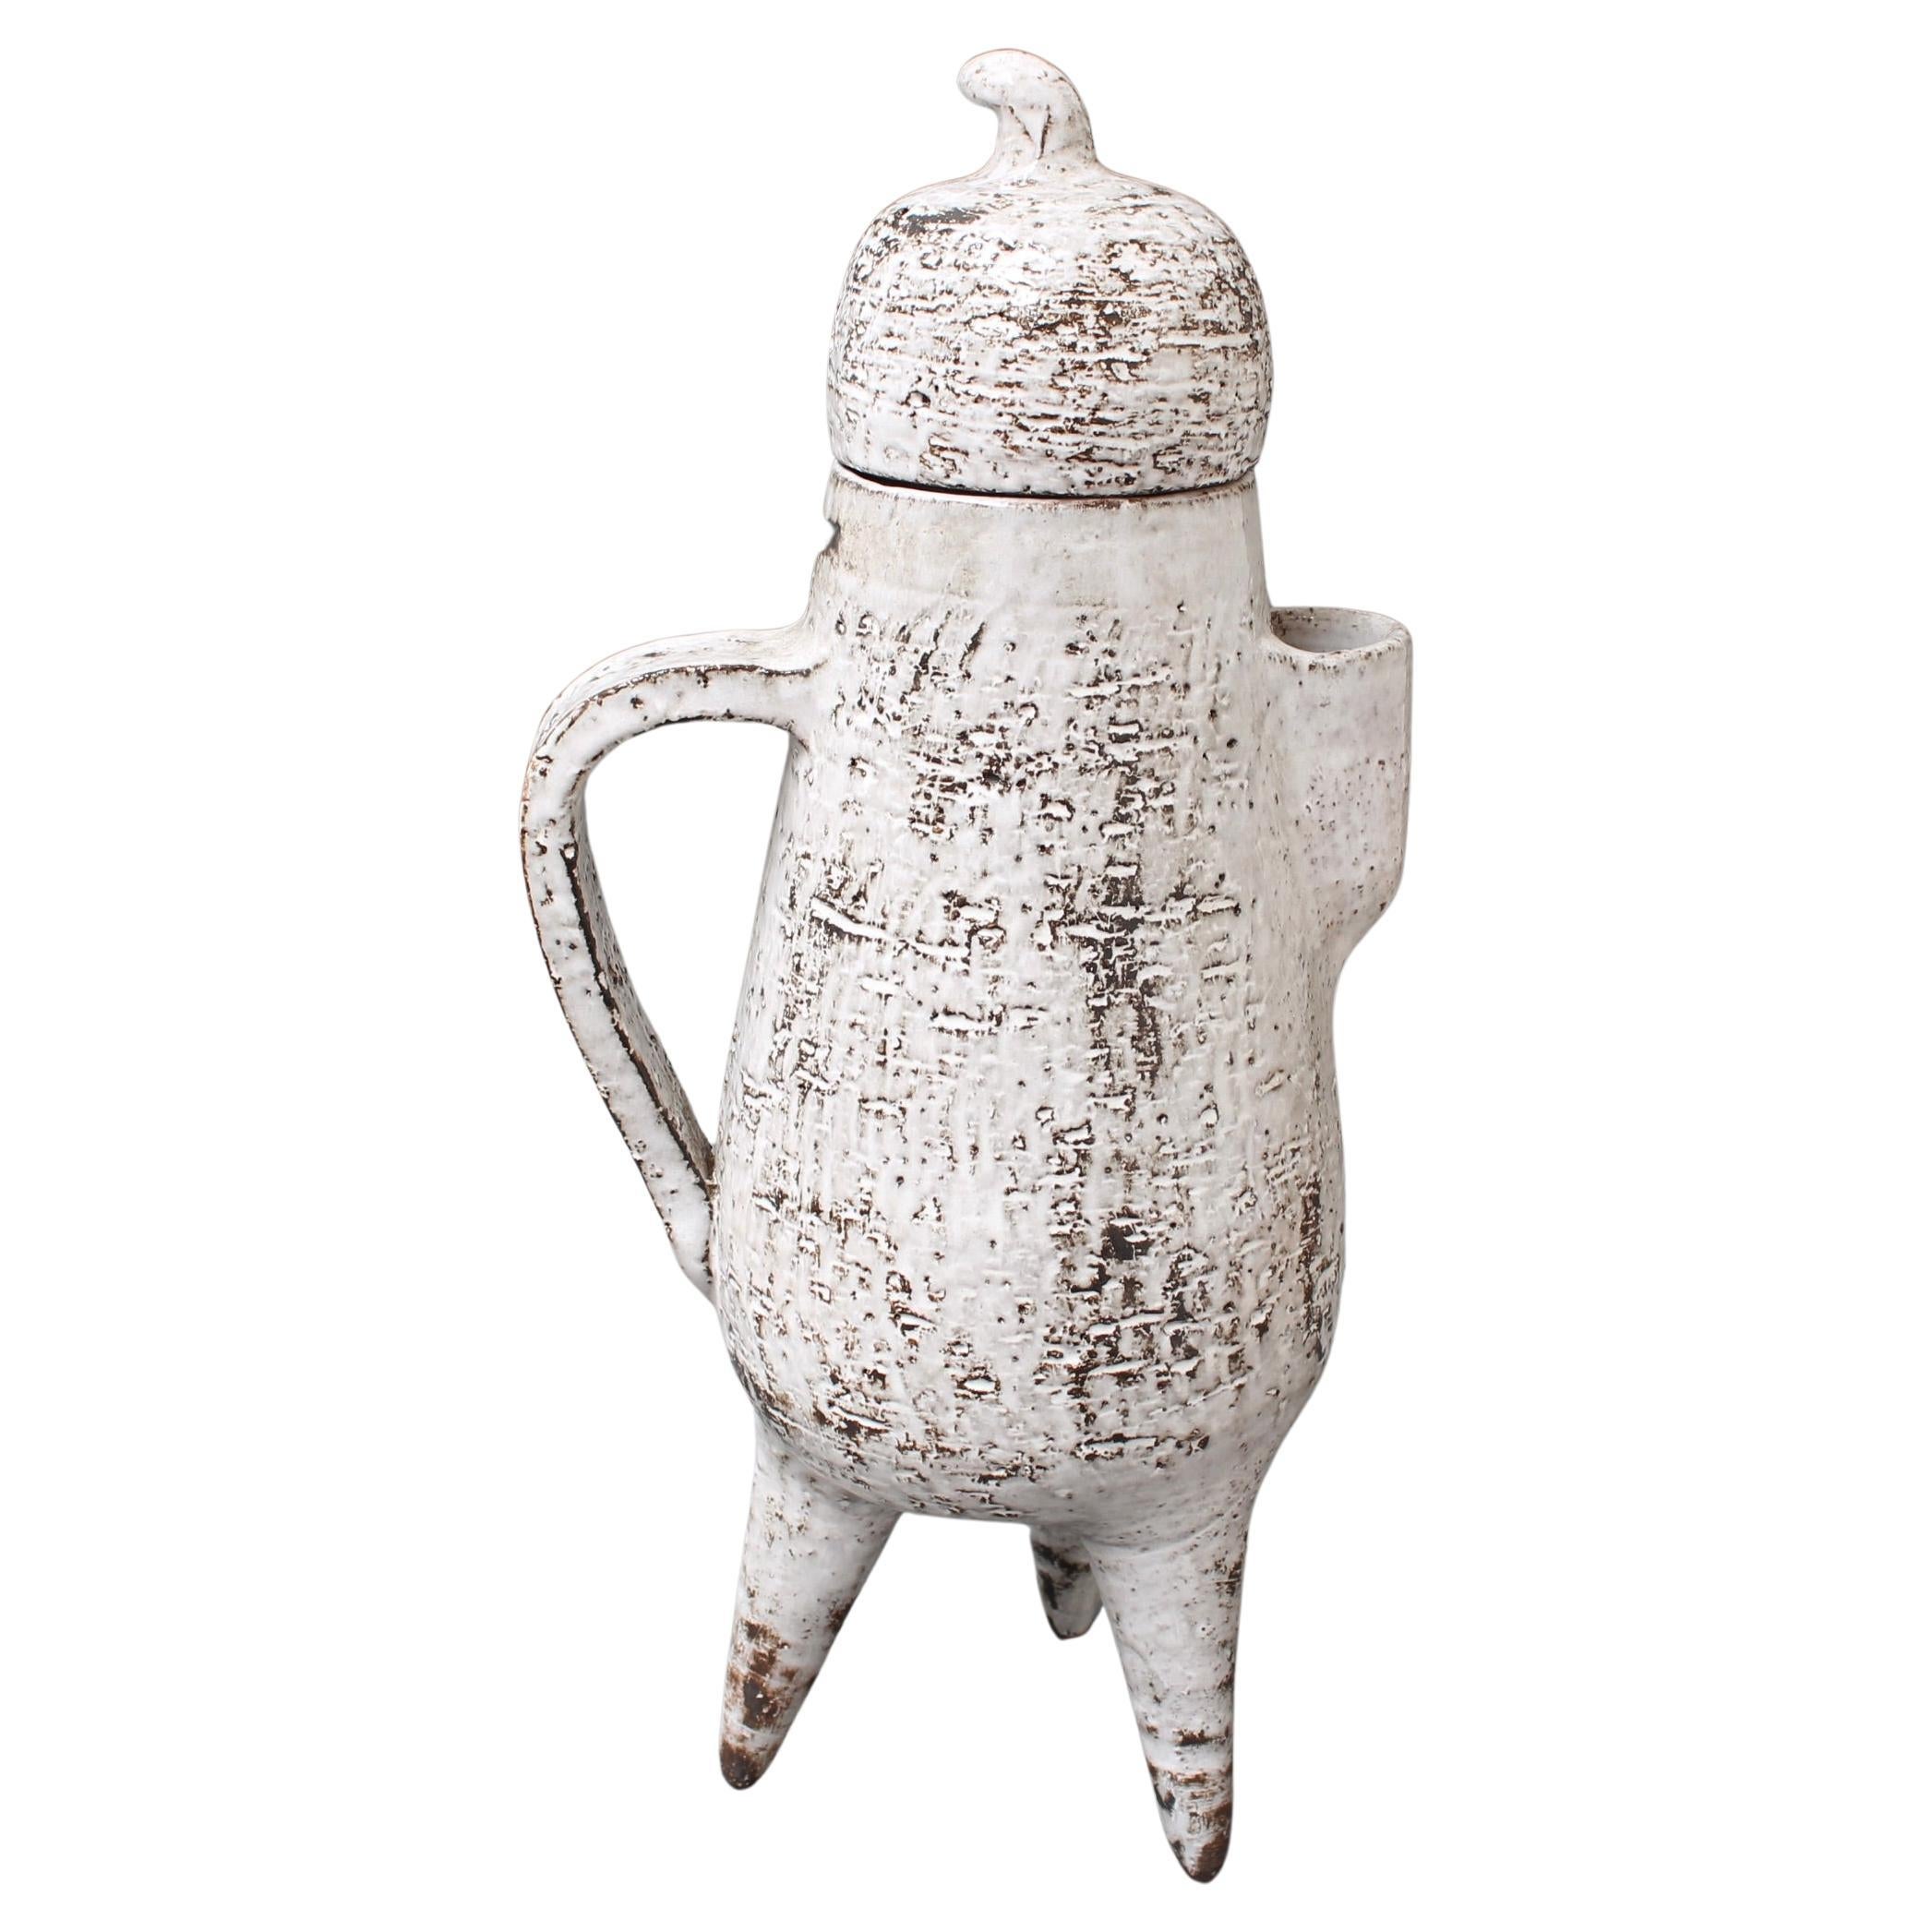 Vintage French ceramic jug by Gérard Hofmann (circa 1960s). A three-legged, elongated pear with stem on the lid makes for a piece so unique it is unlike any other. The surface is in one of his trademark finishes, a chalky white enamel with elements